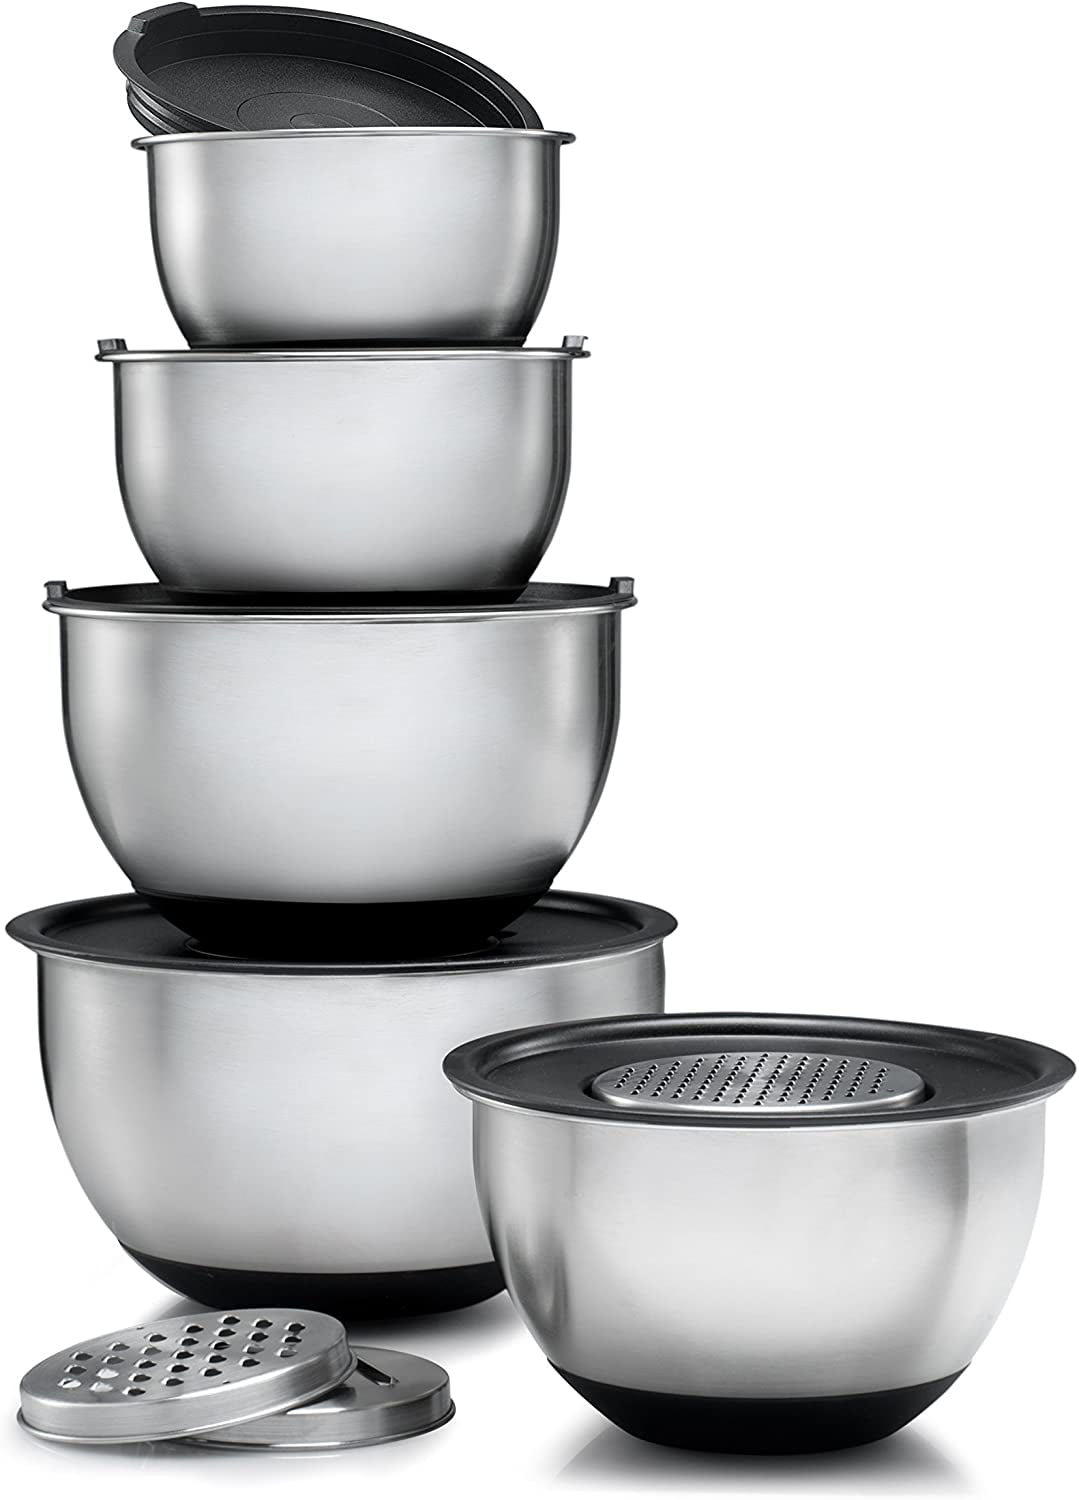 Sagler Stainless Steel Mixing Bowls Set of 5, with Lids and 3 kind 